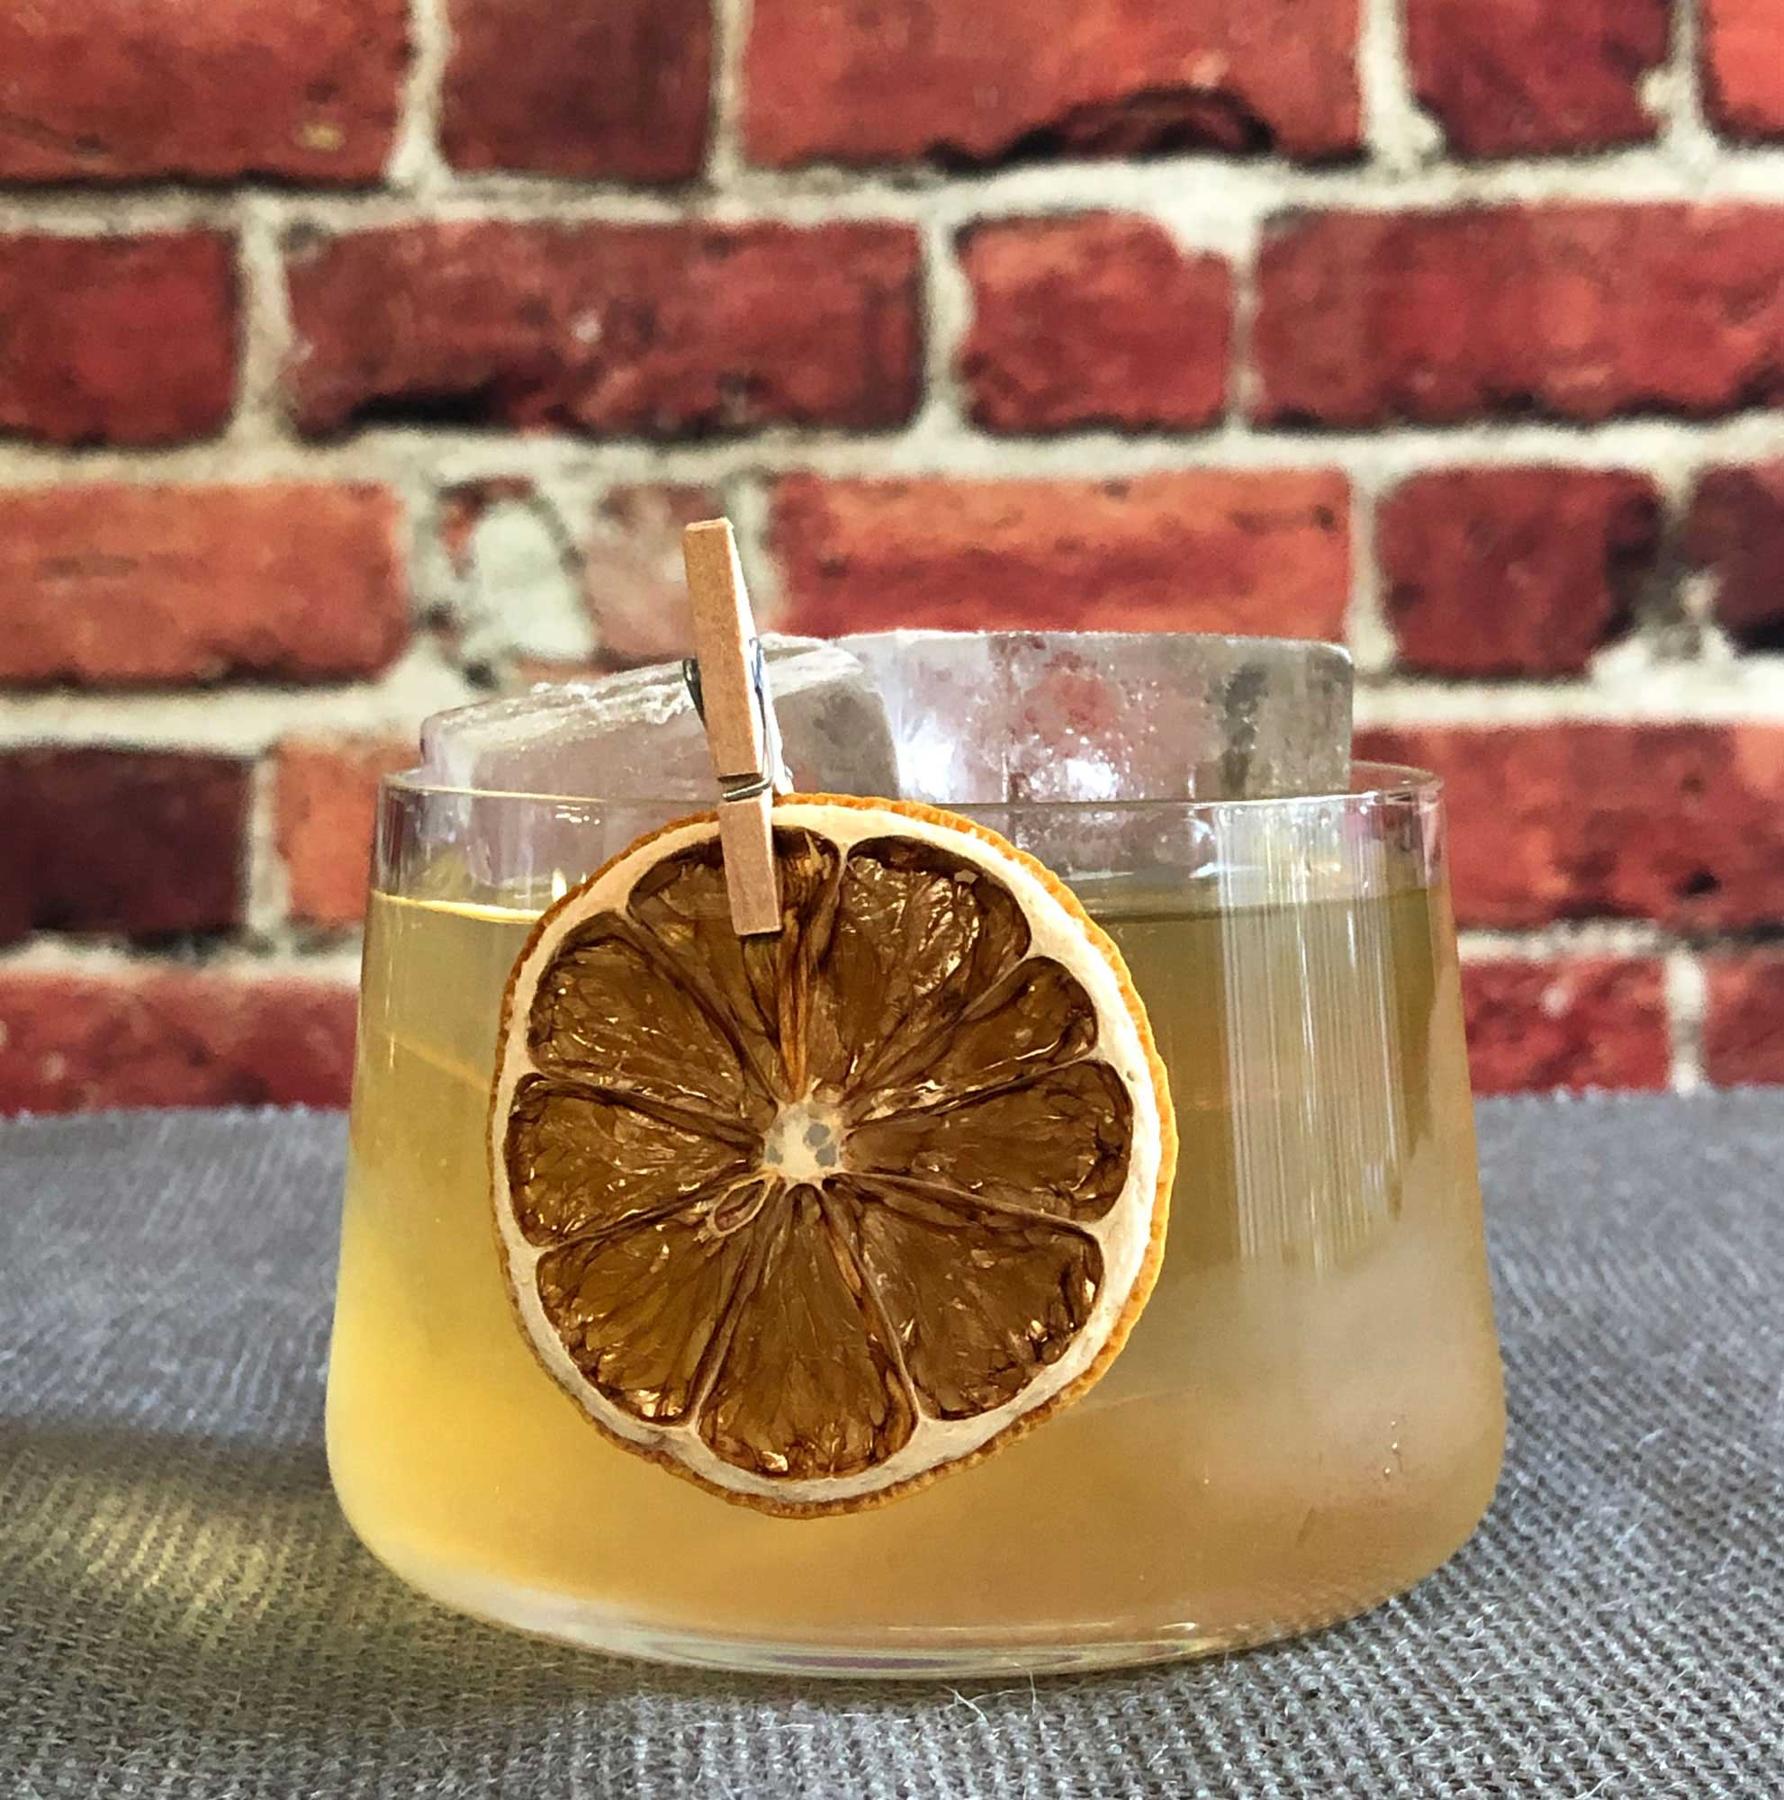 An example of the July on Royal Street, the mixed drink (drink) featuring Mattei Cap Corse Blanc Quinquina, Salers Gentian Apéritif, reposado tequila, Bénédictine, and lemon juice; photo by Lee Edwards